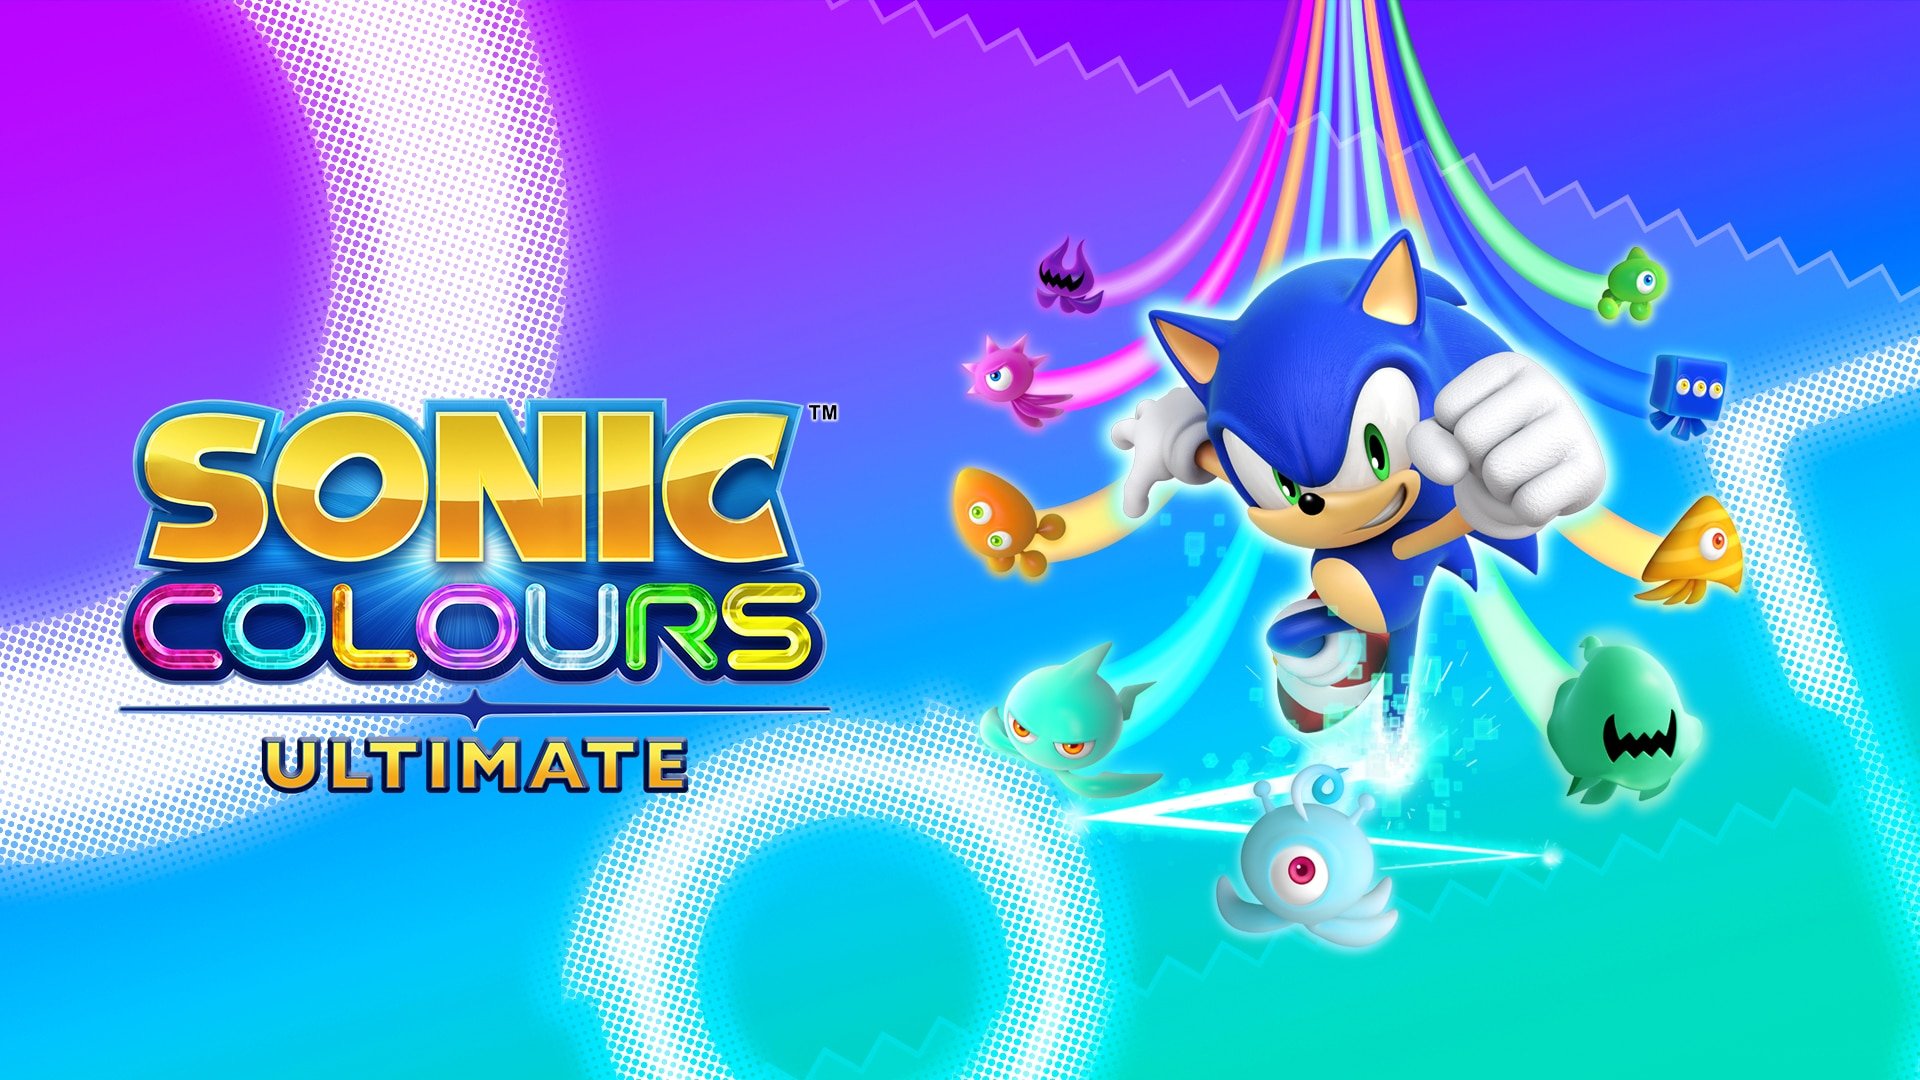 Sonic Colours Ultimate new patch released